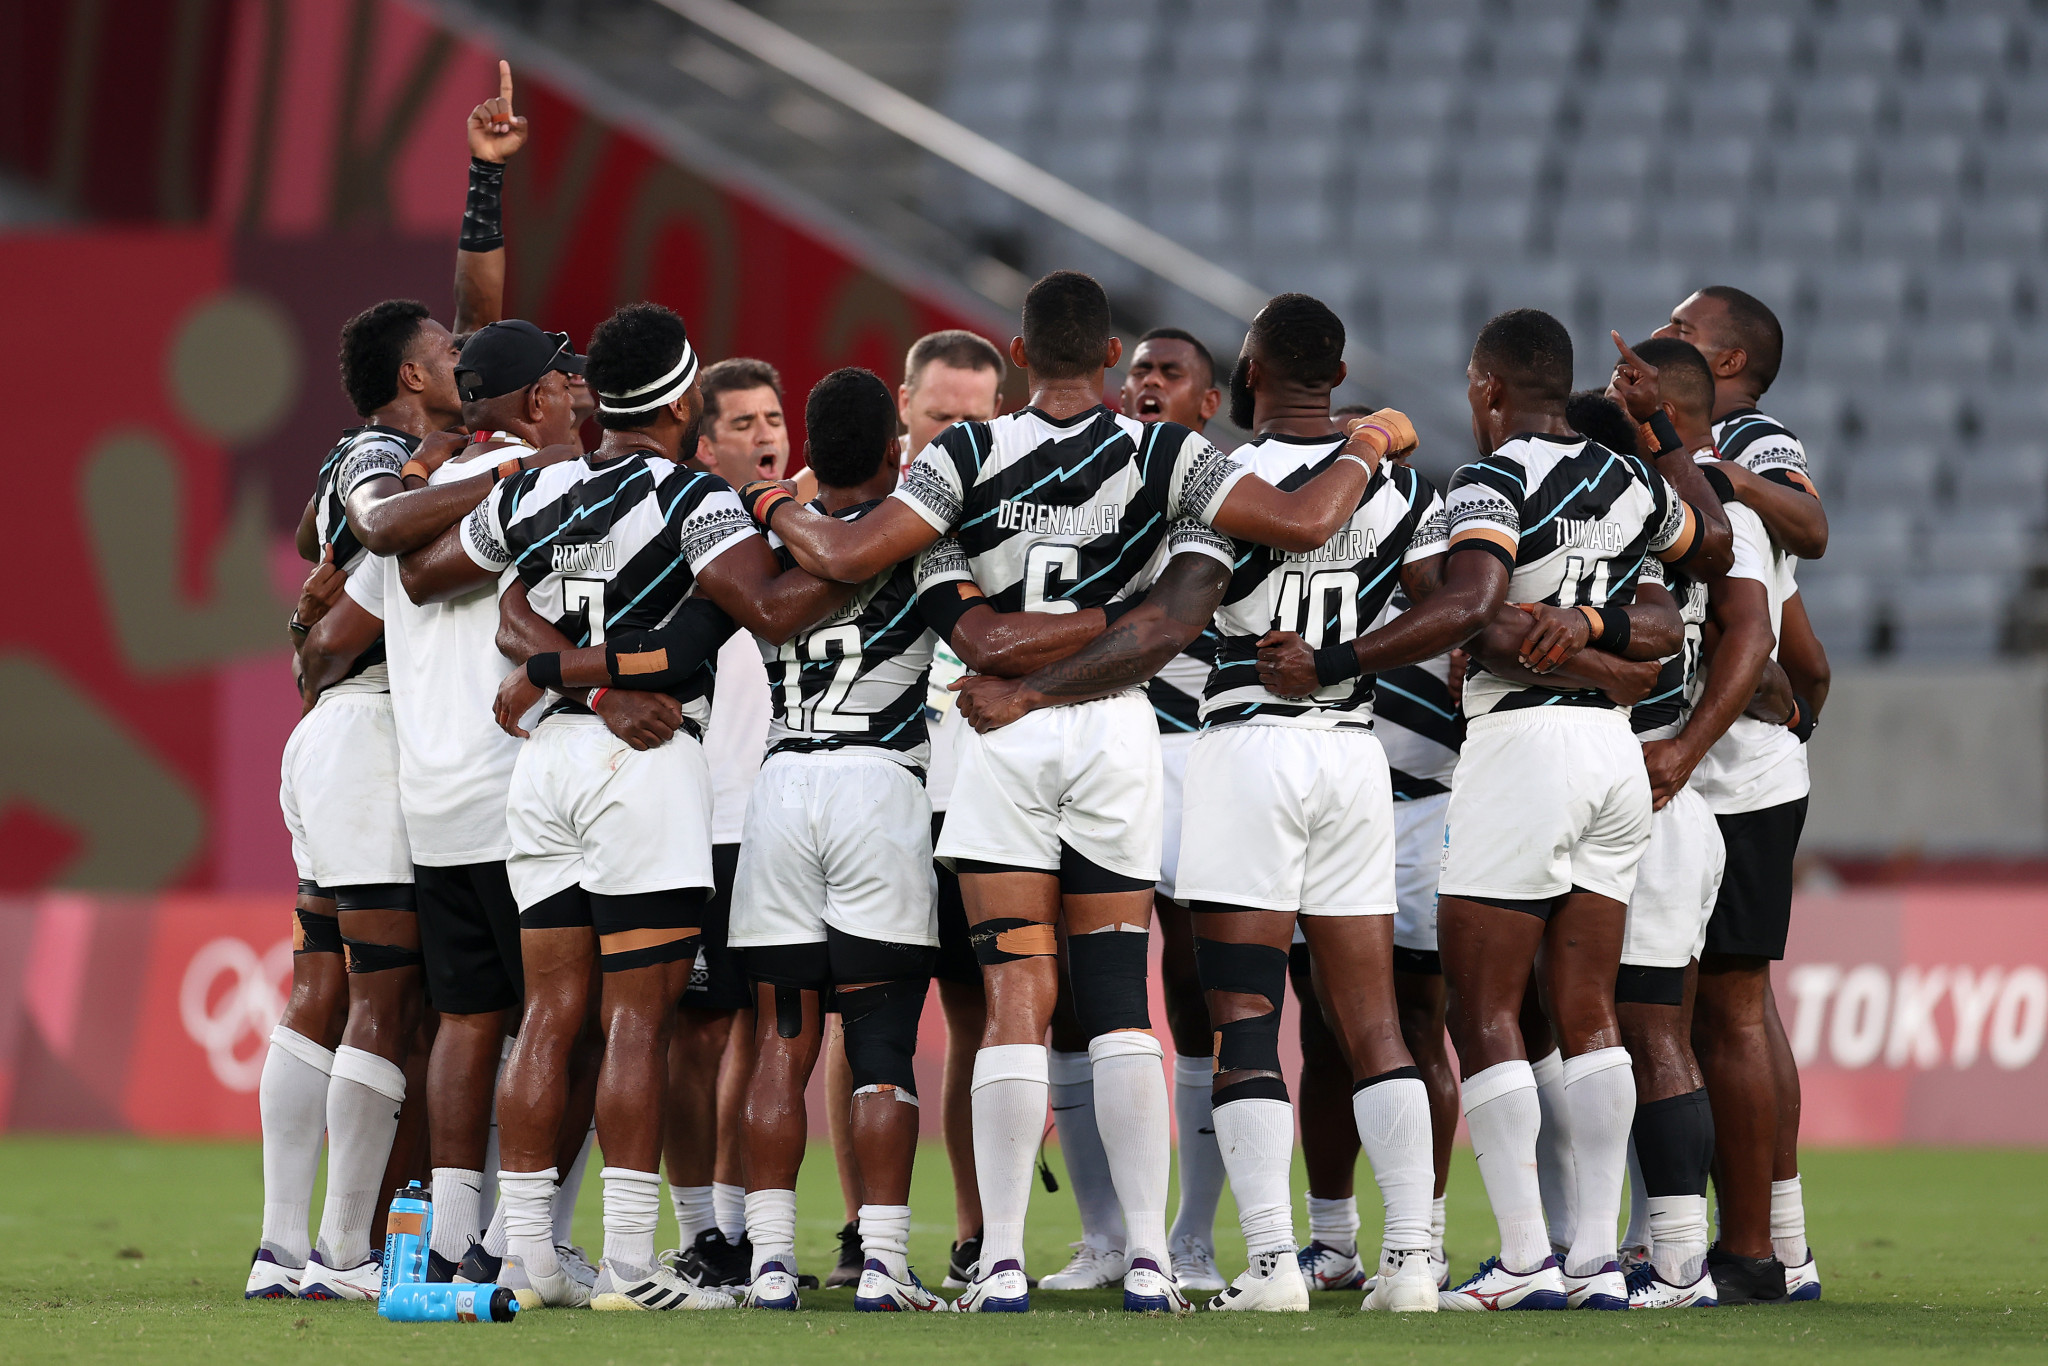 Fiji won two rugby sevens medals at Tokyo 2020 ©Getty Images